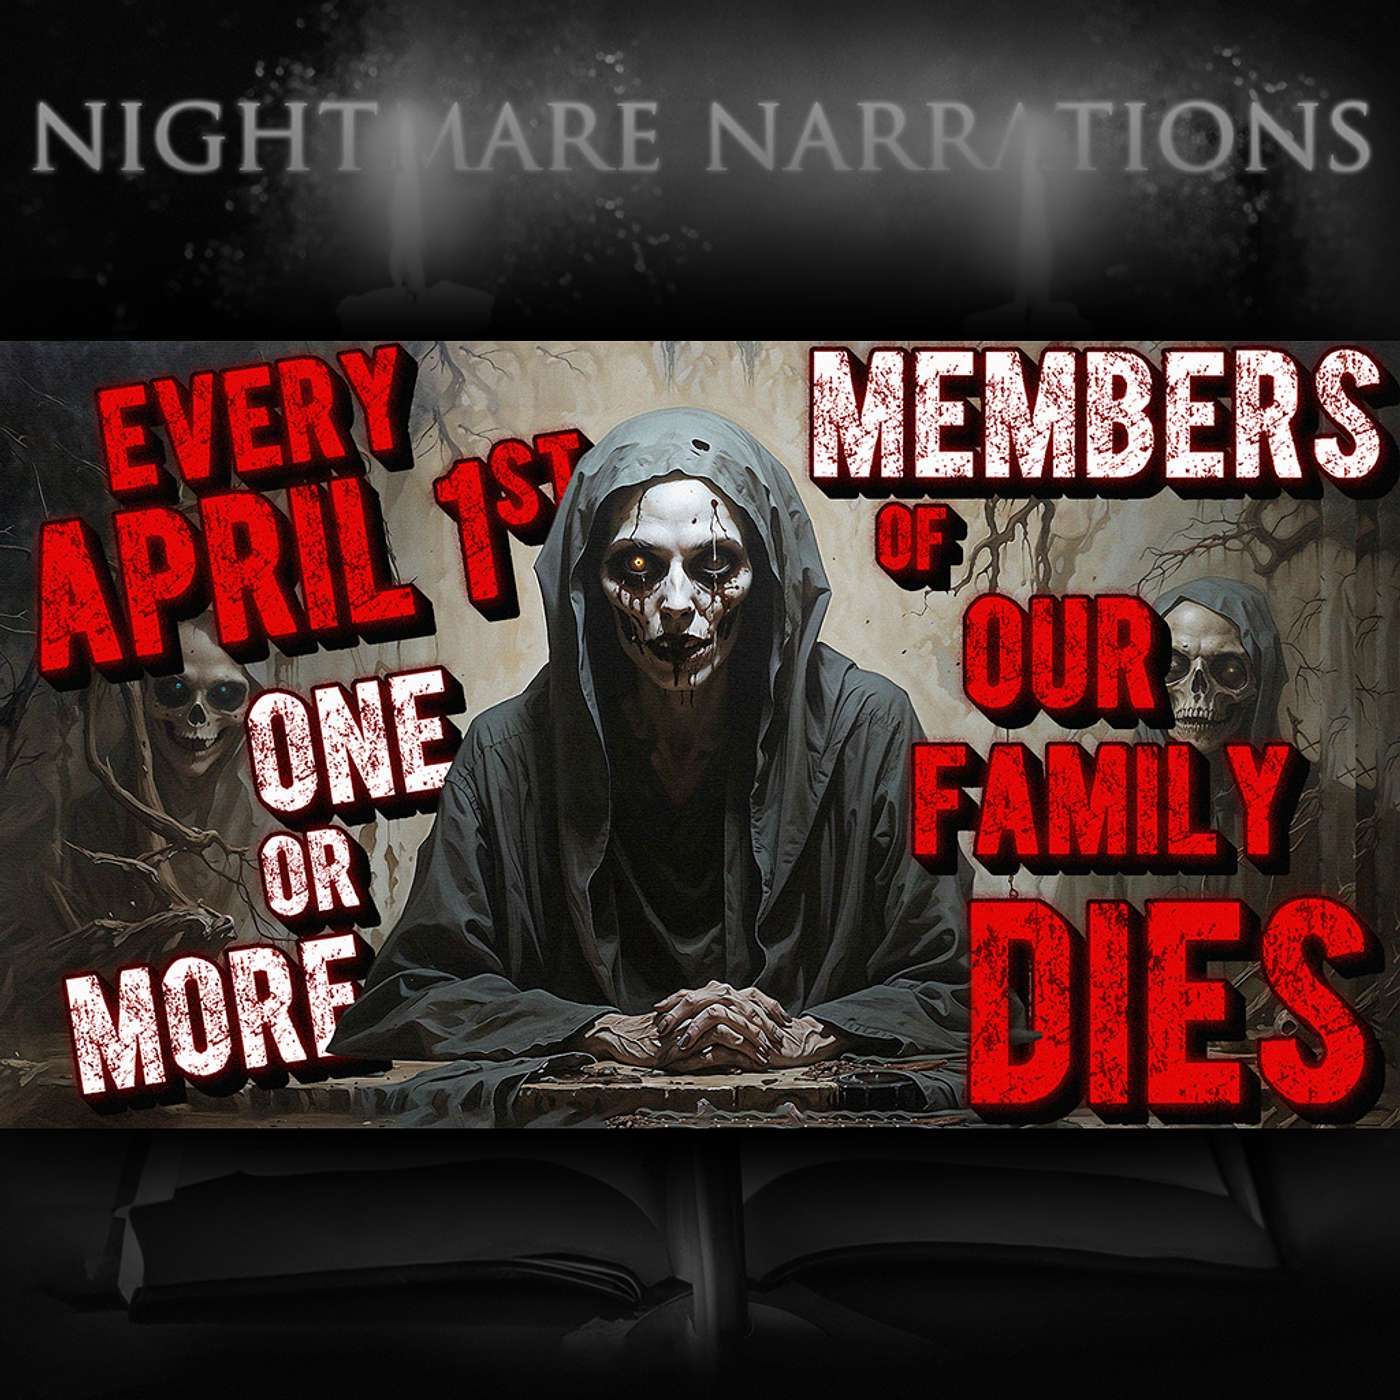 April Fools Horror: Every April 1st One or More of Our Family Dies - Scary Reddit Story